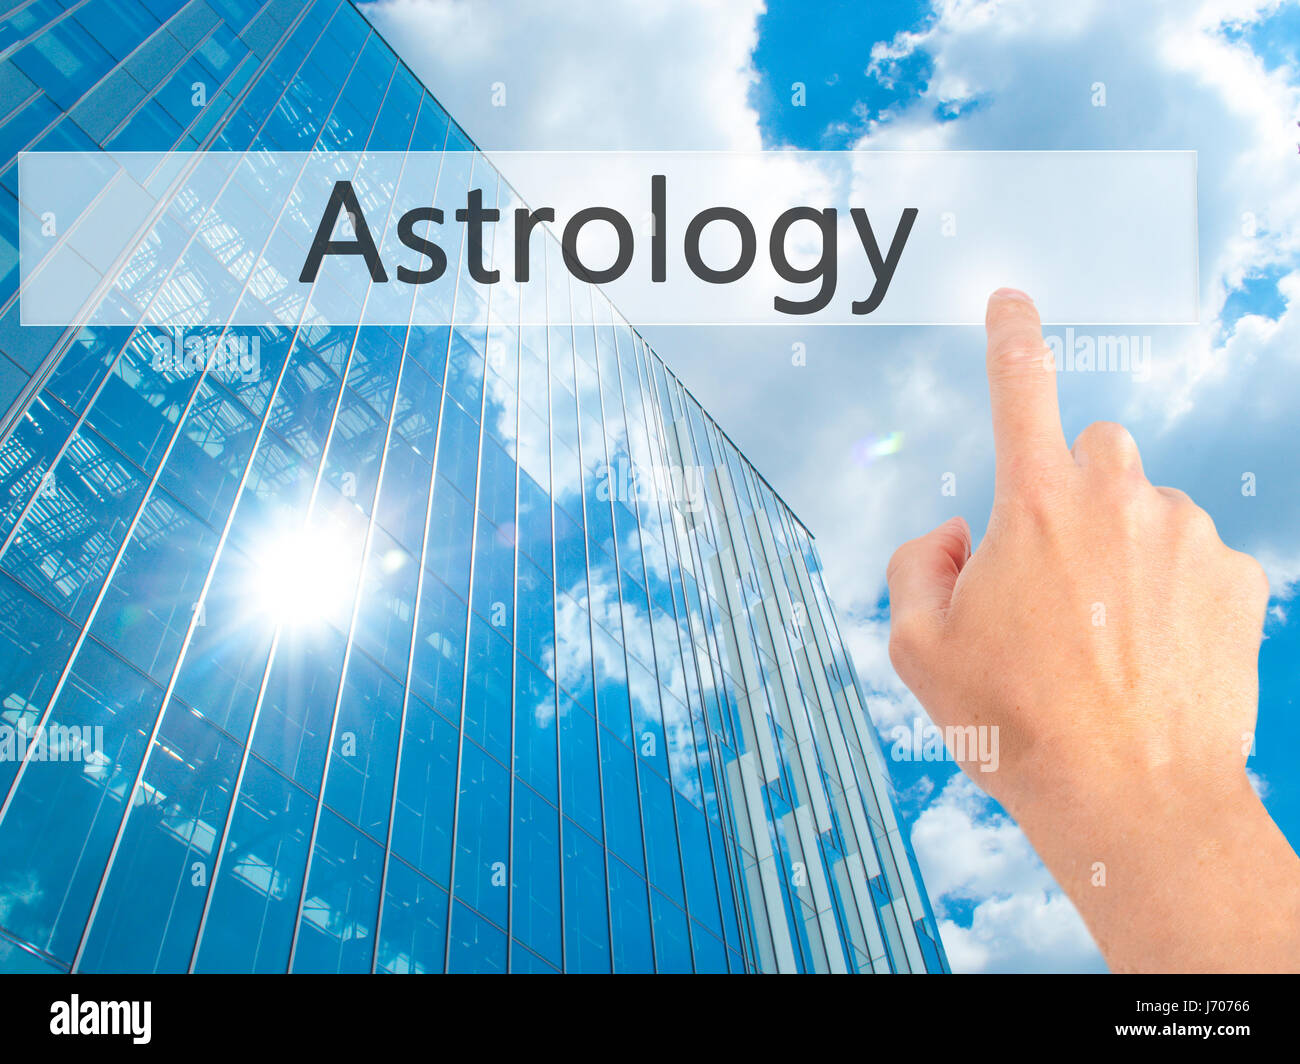 Astrology - Hand pressing a button on blurred background concept . Business, technology, internet concept. Stock Photo Stock Photo